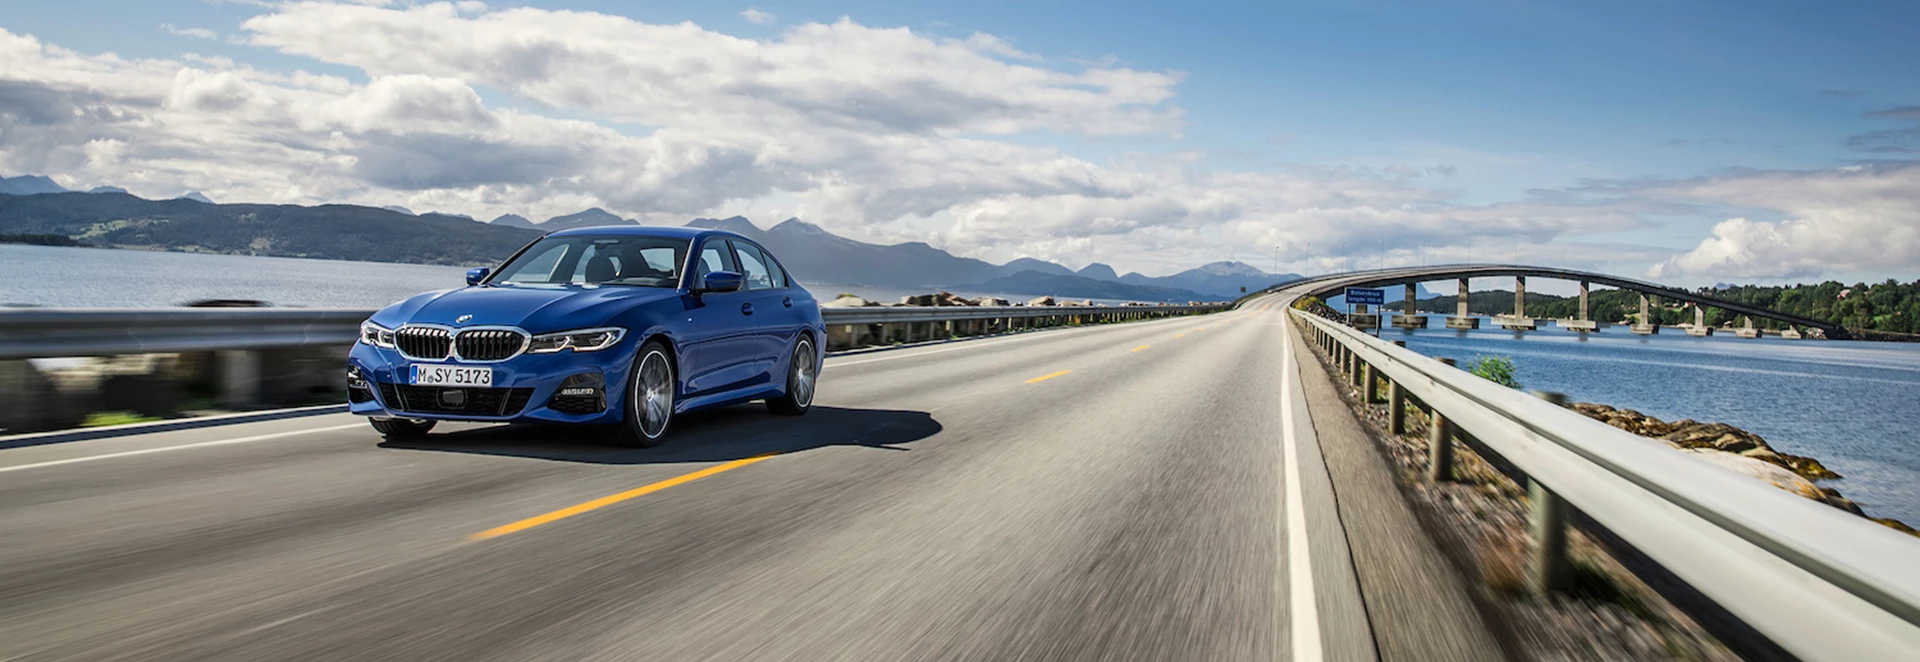 BMW 3 Series: Why has it been class-leading for over 40 years?